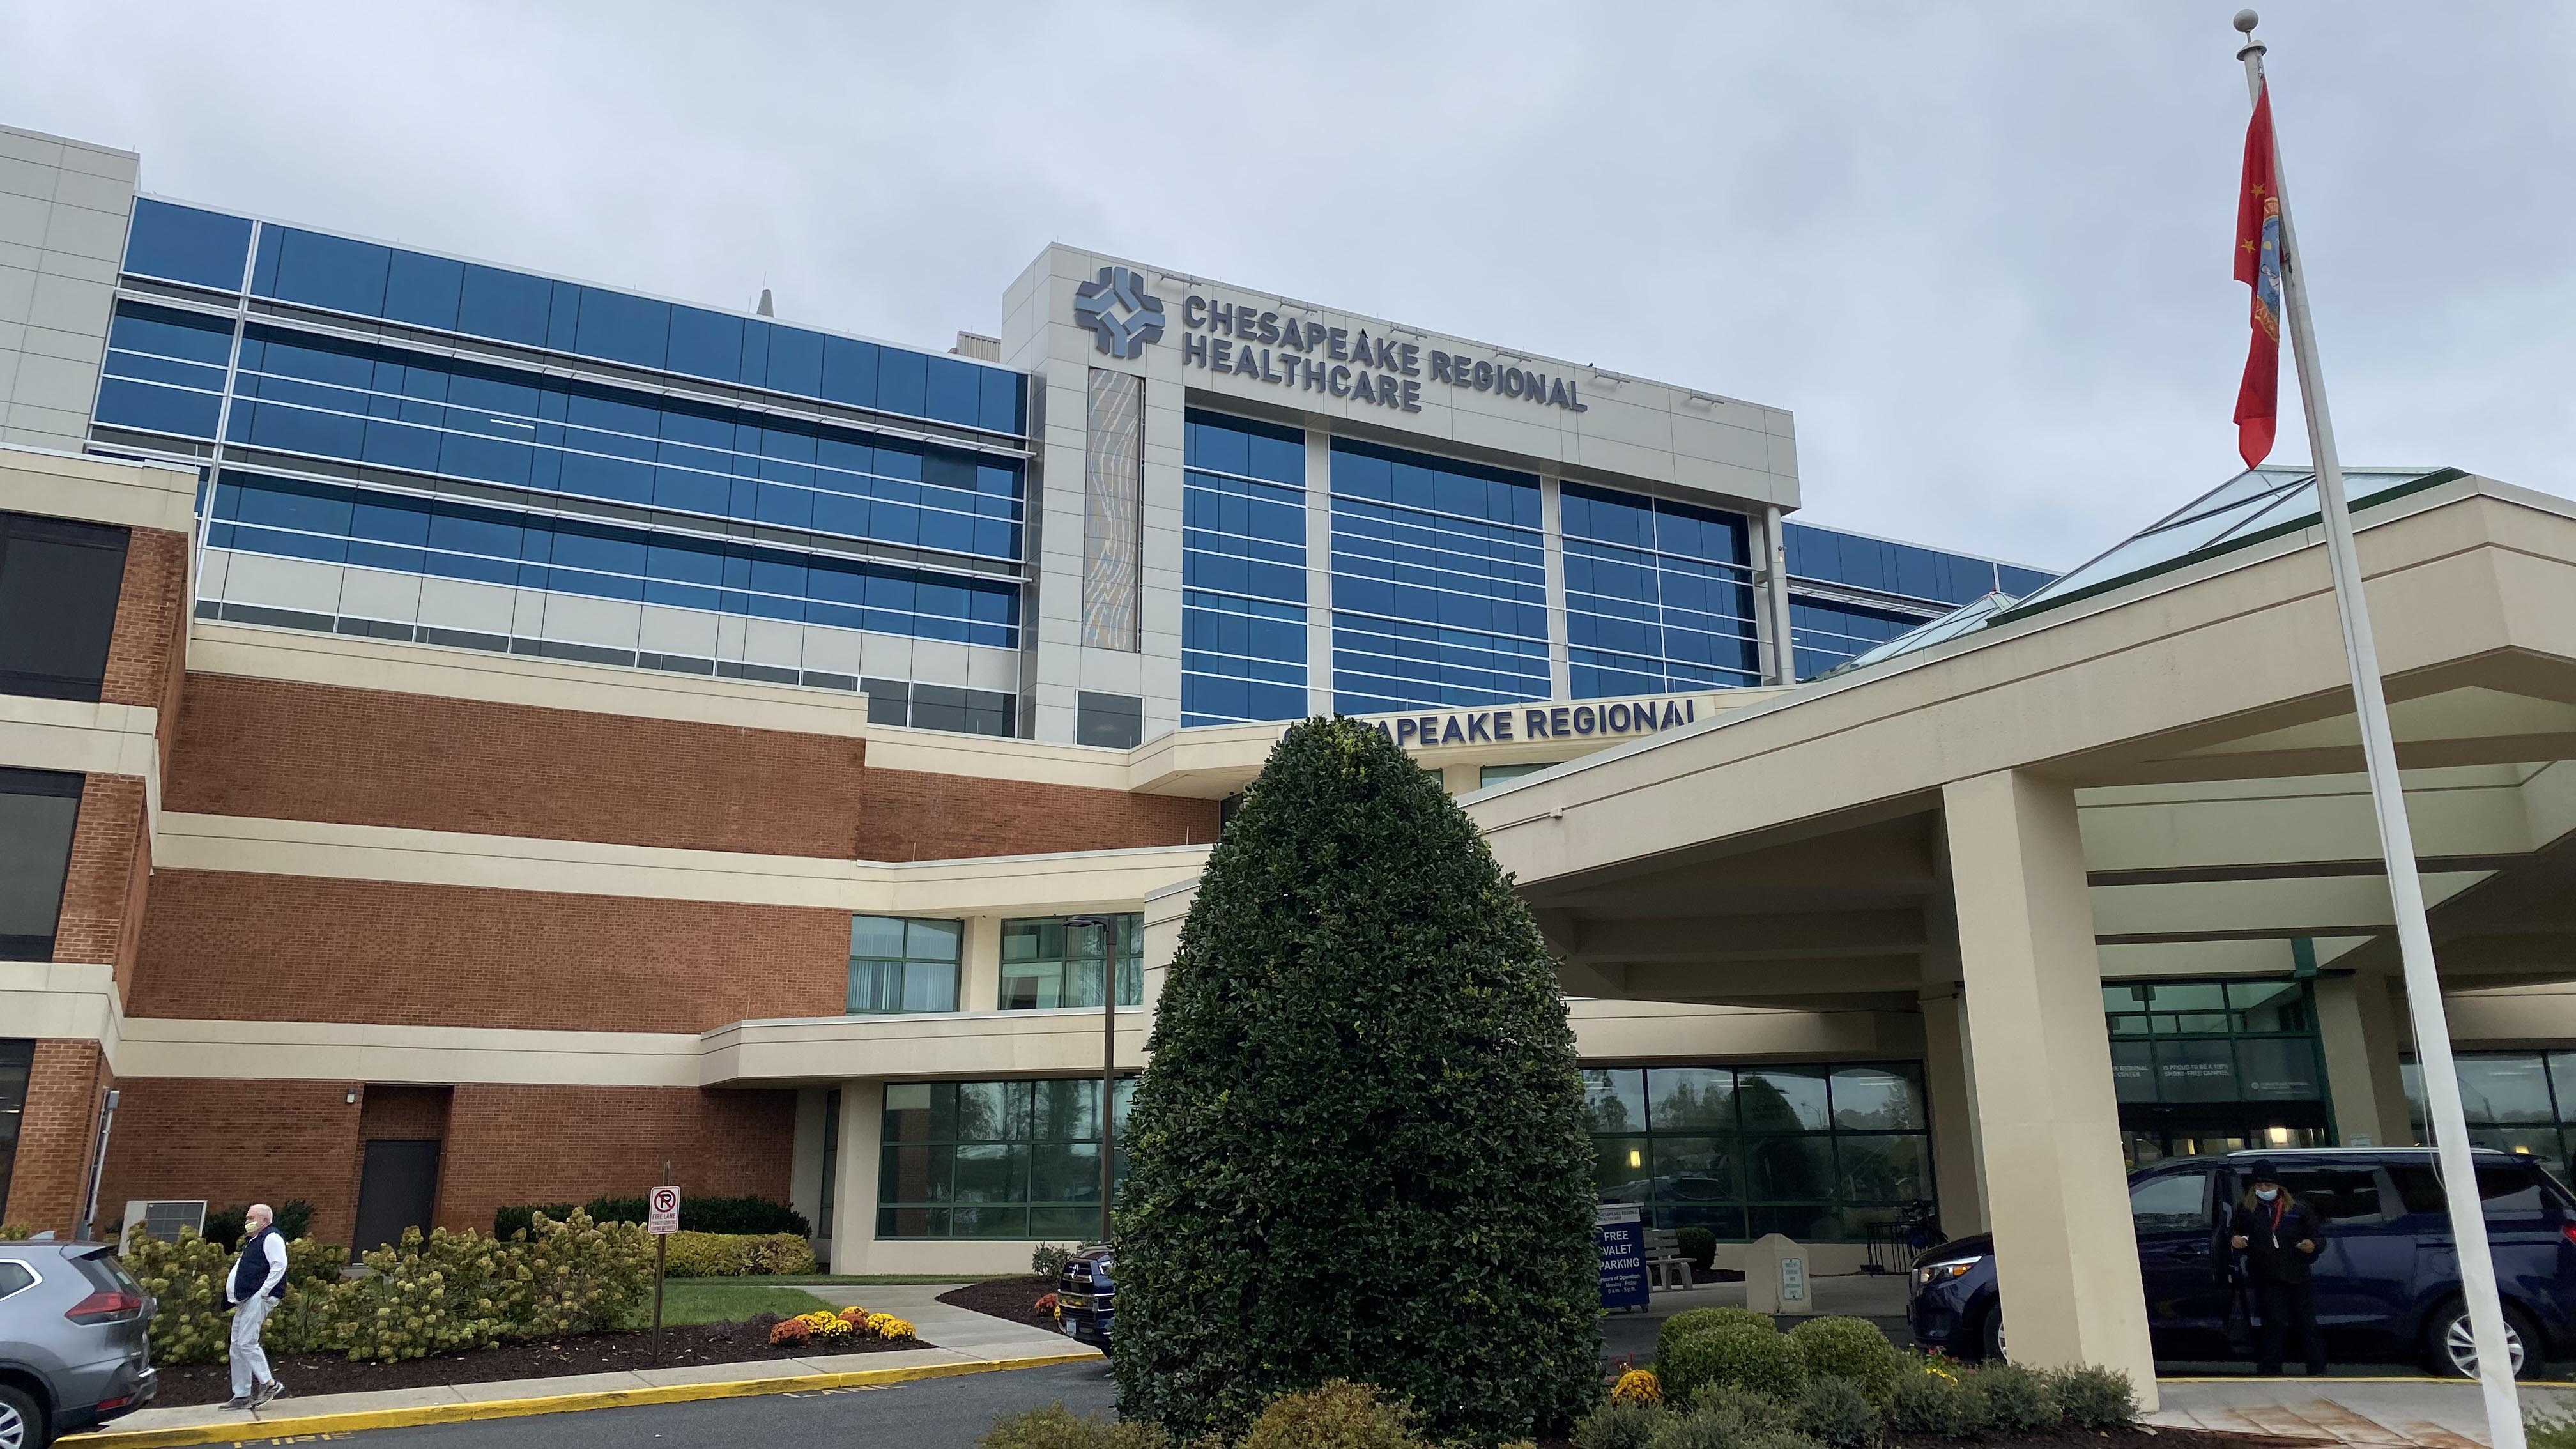 Cigna said prices at Chesapeake Regional are higher than other hospitals in the area. The hospital says that's "simply untrue." (Image: Katherine Hafner)